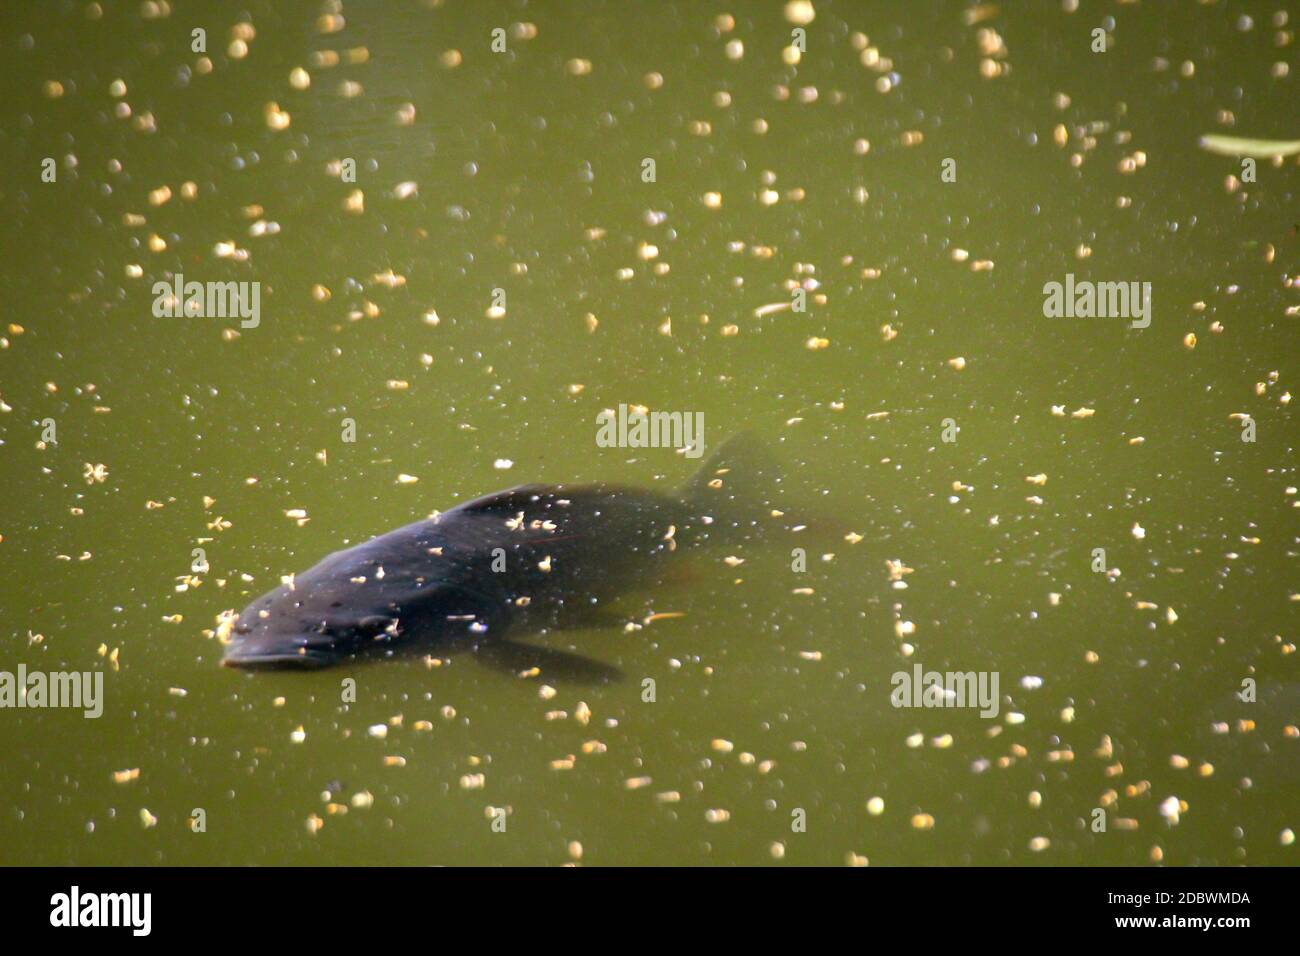 A fish, carp swims on the surface of a pond. Stock Photo